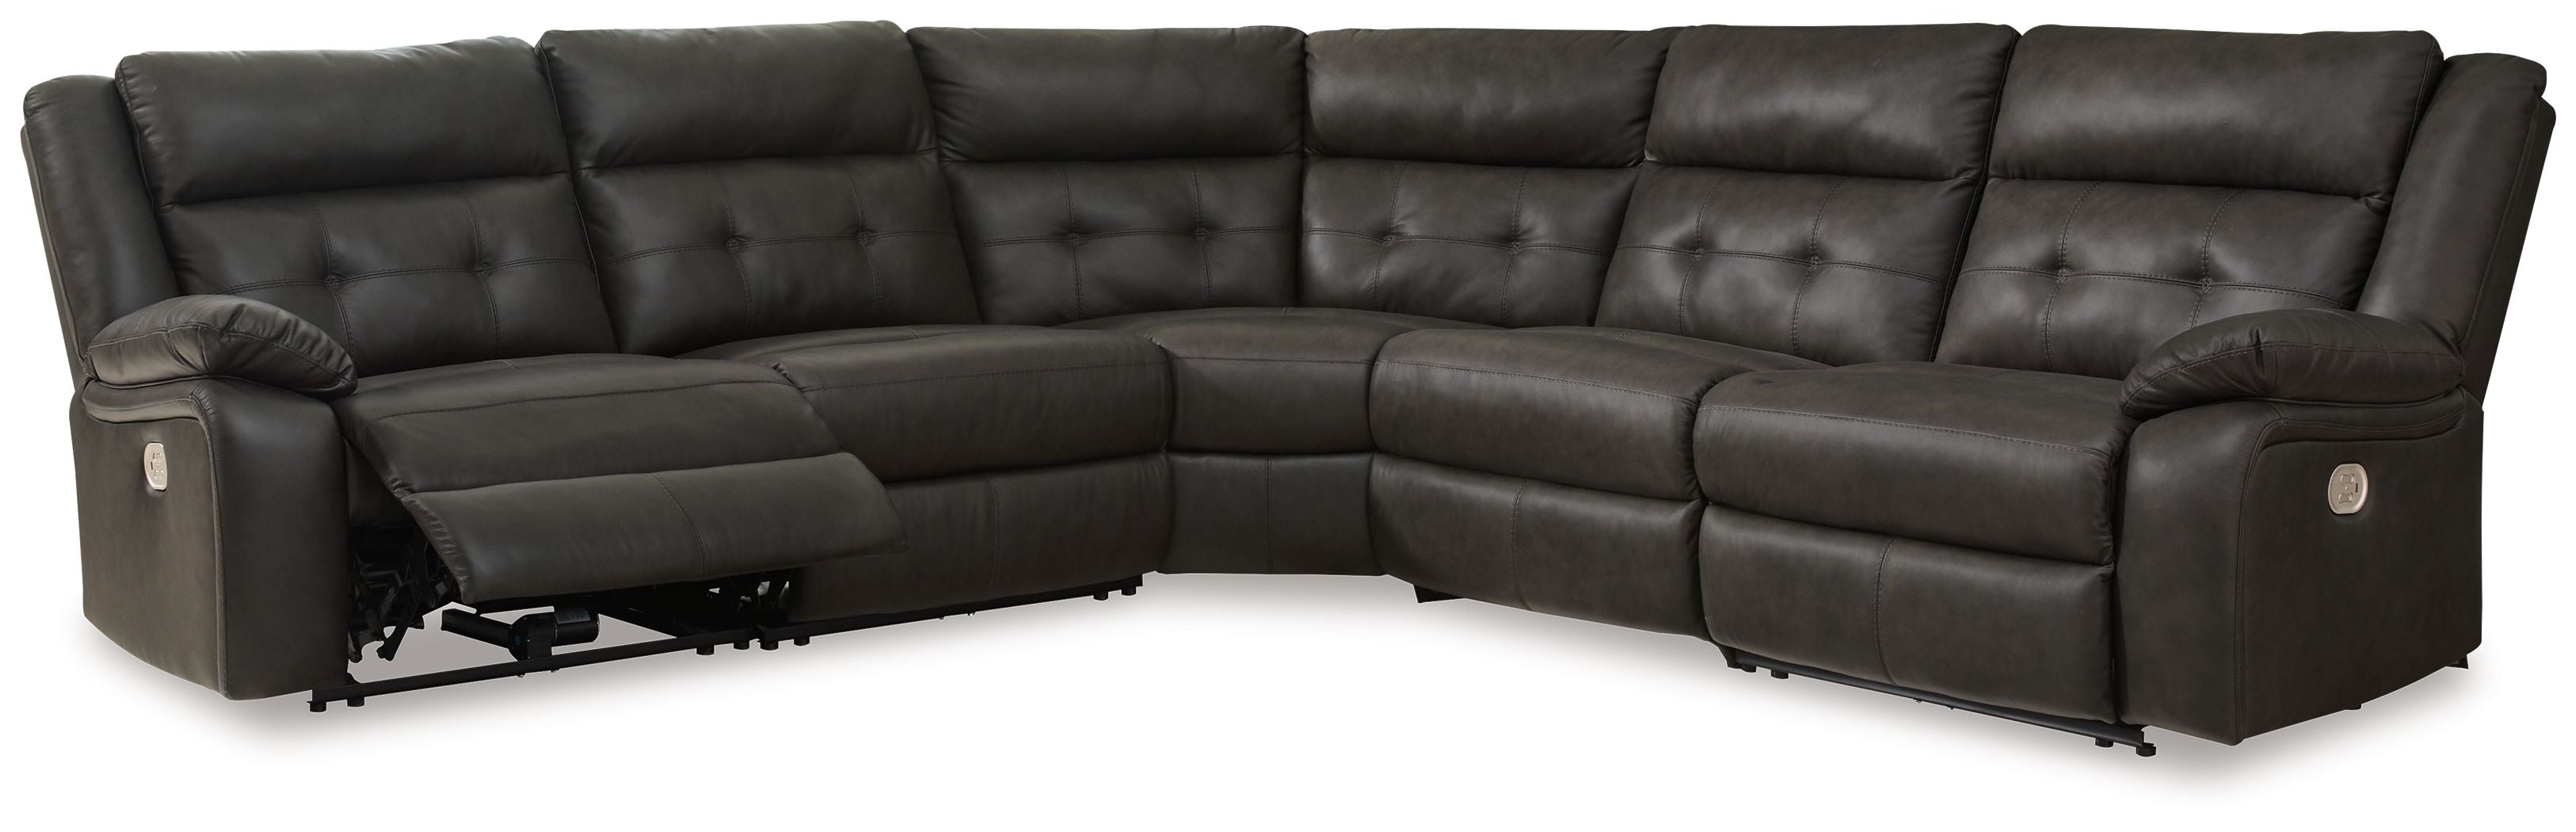 Mackie Pike Black Power Reclining Sectional-Reclining Sectionals-American Furniture Outlet